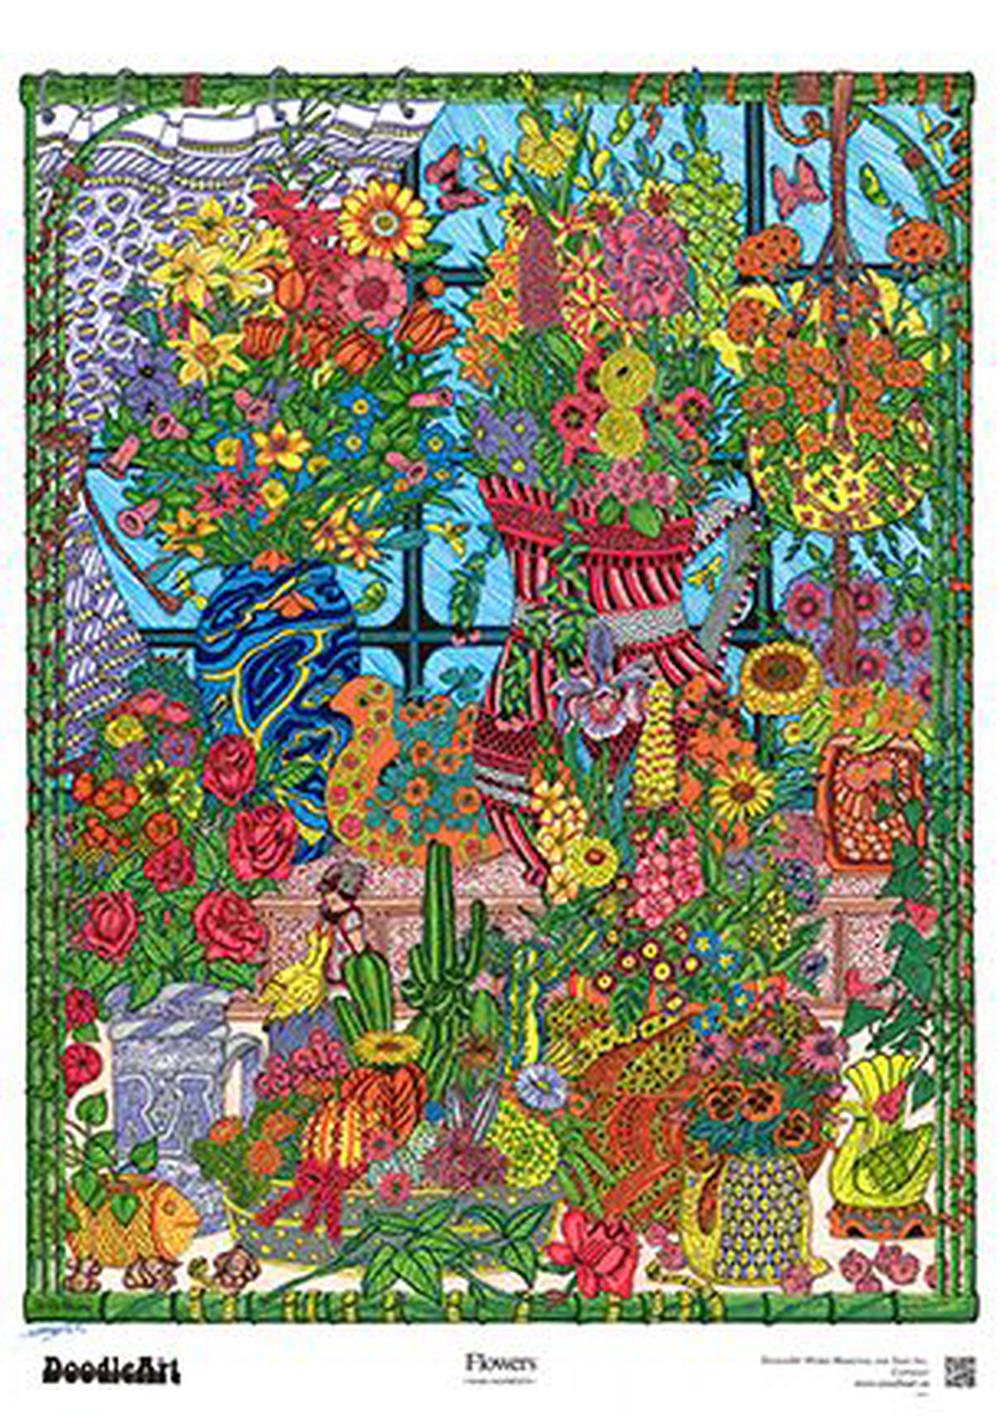 DoodleArt Flowers Poster Buy Online At The Nile